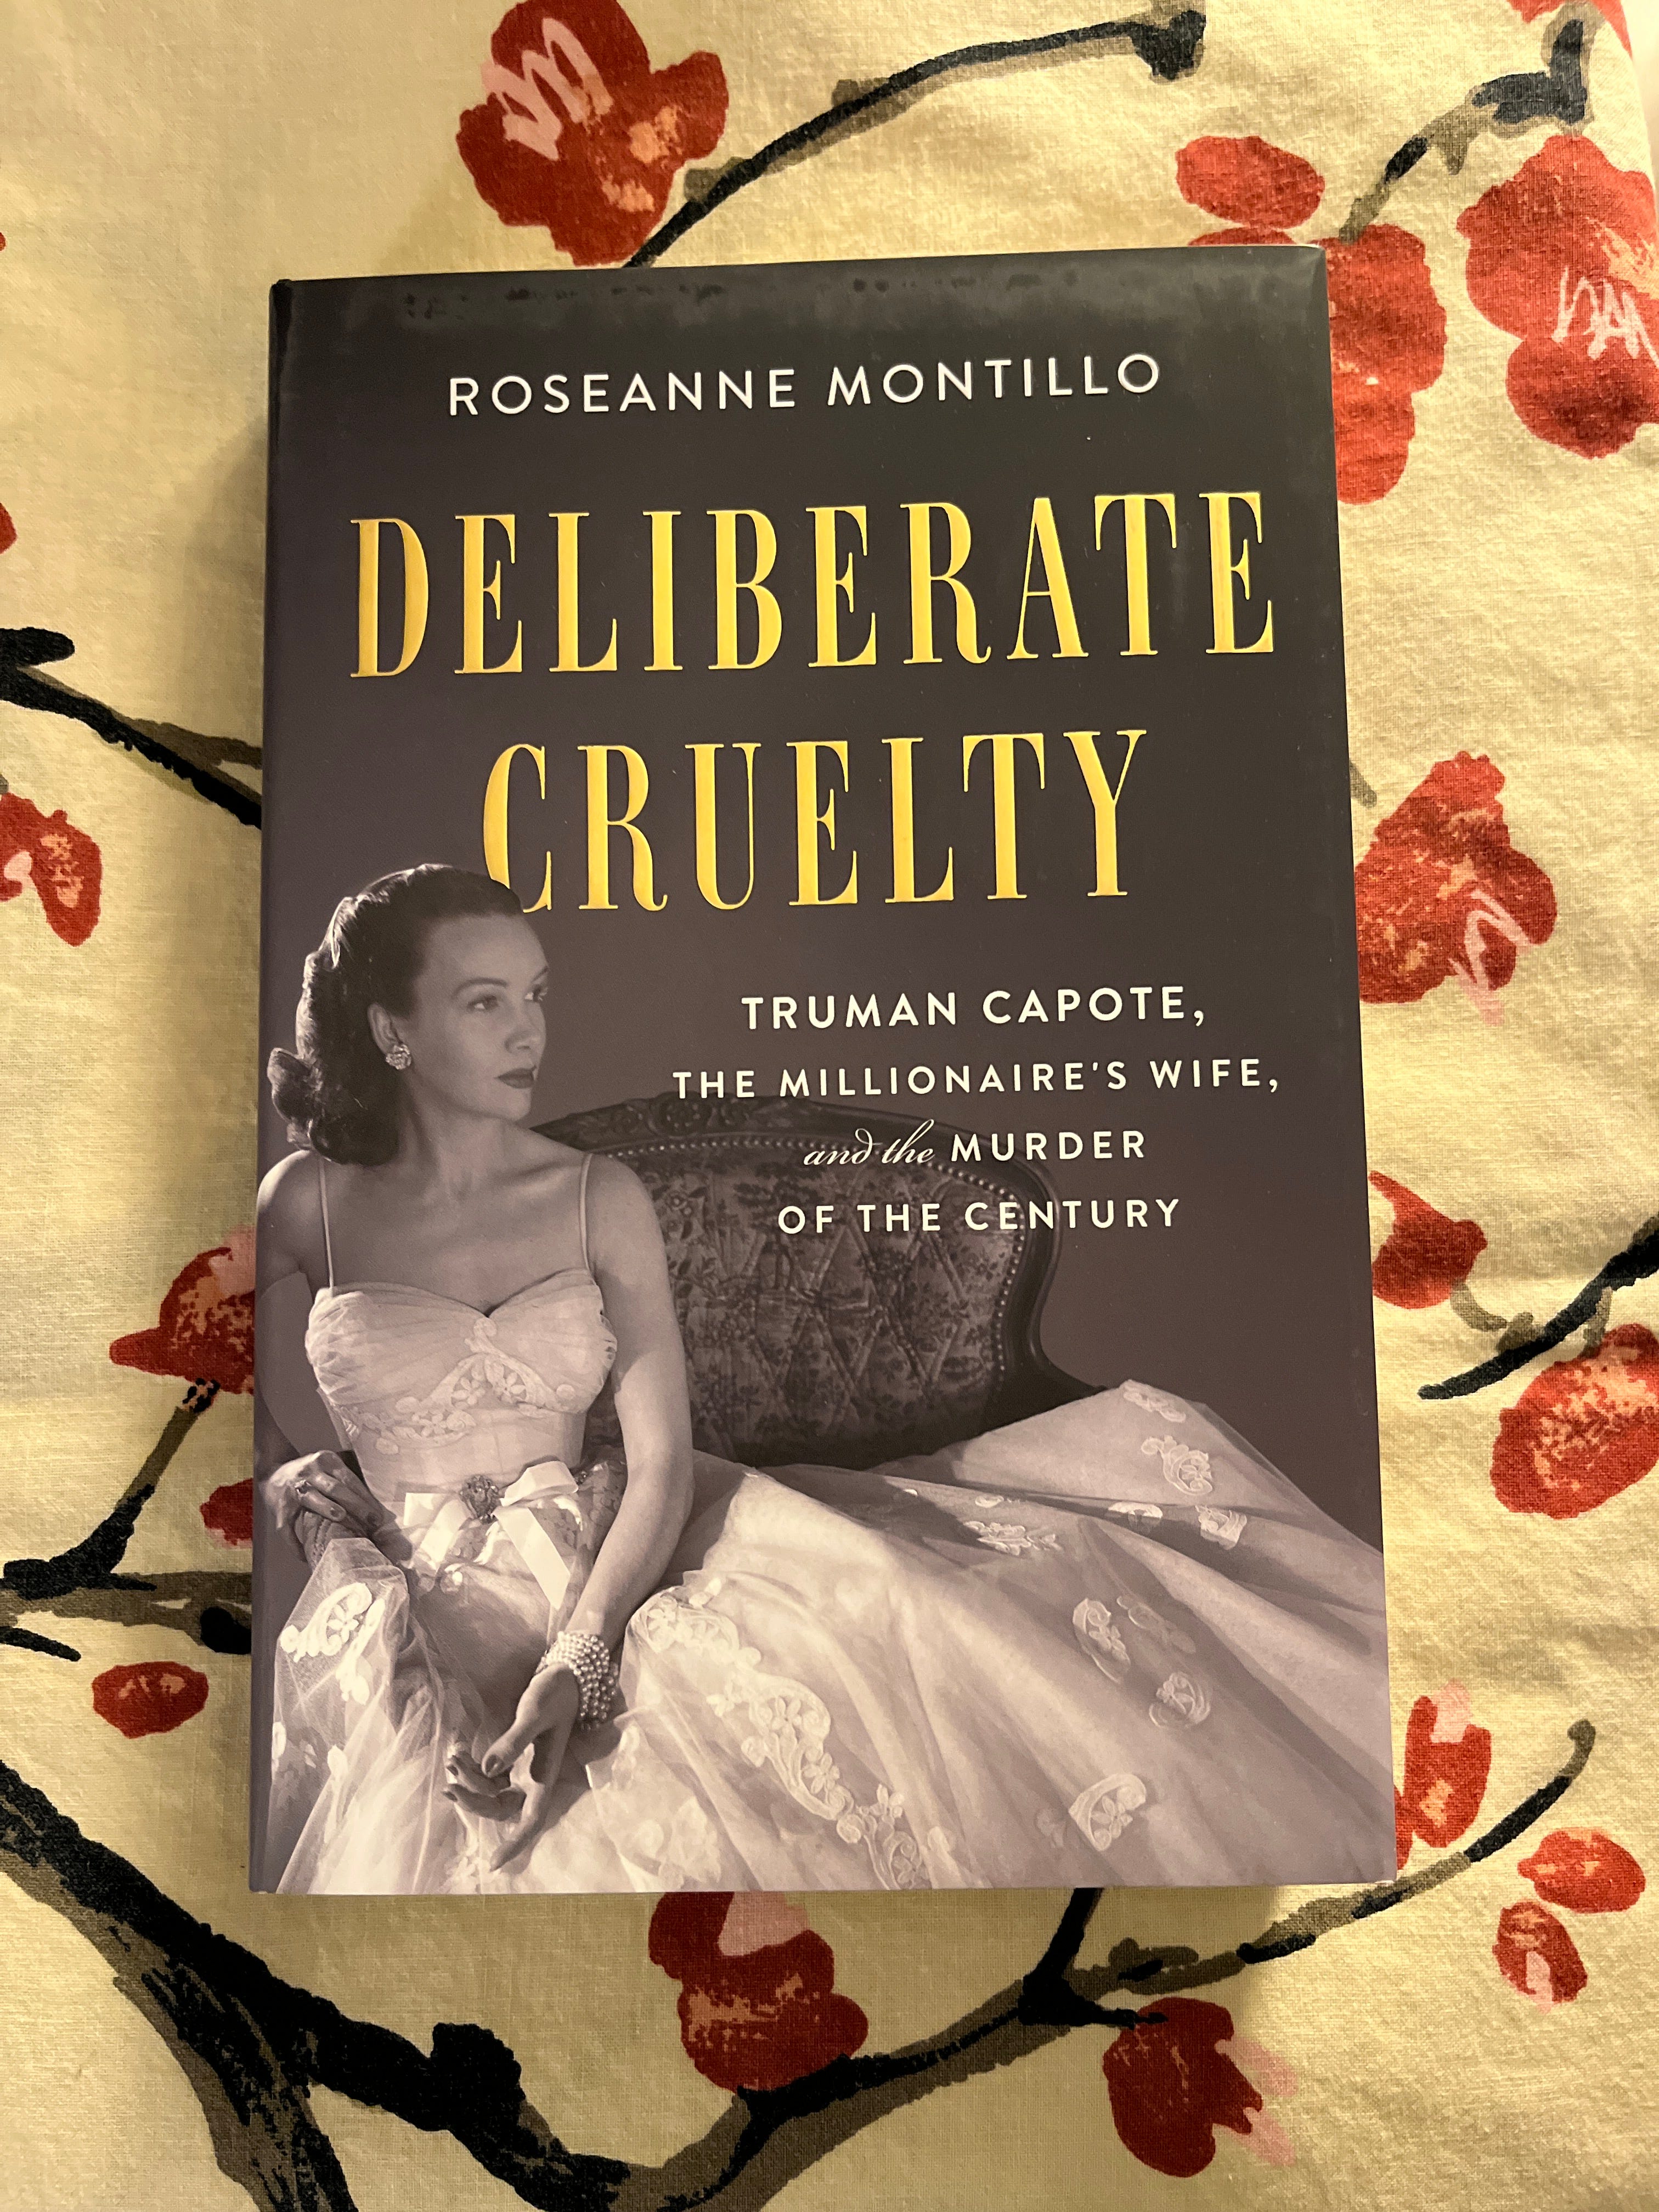 Book review: Deliberate Cruelty, by Roseanne Montillo - The